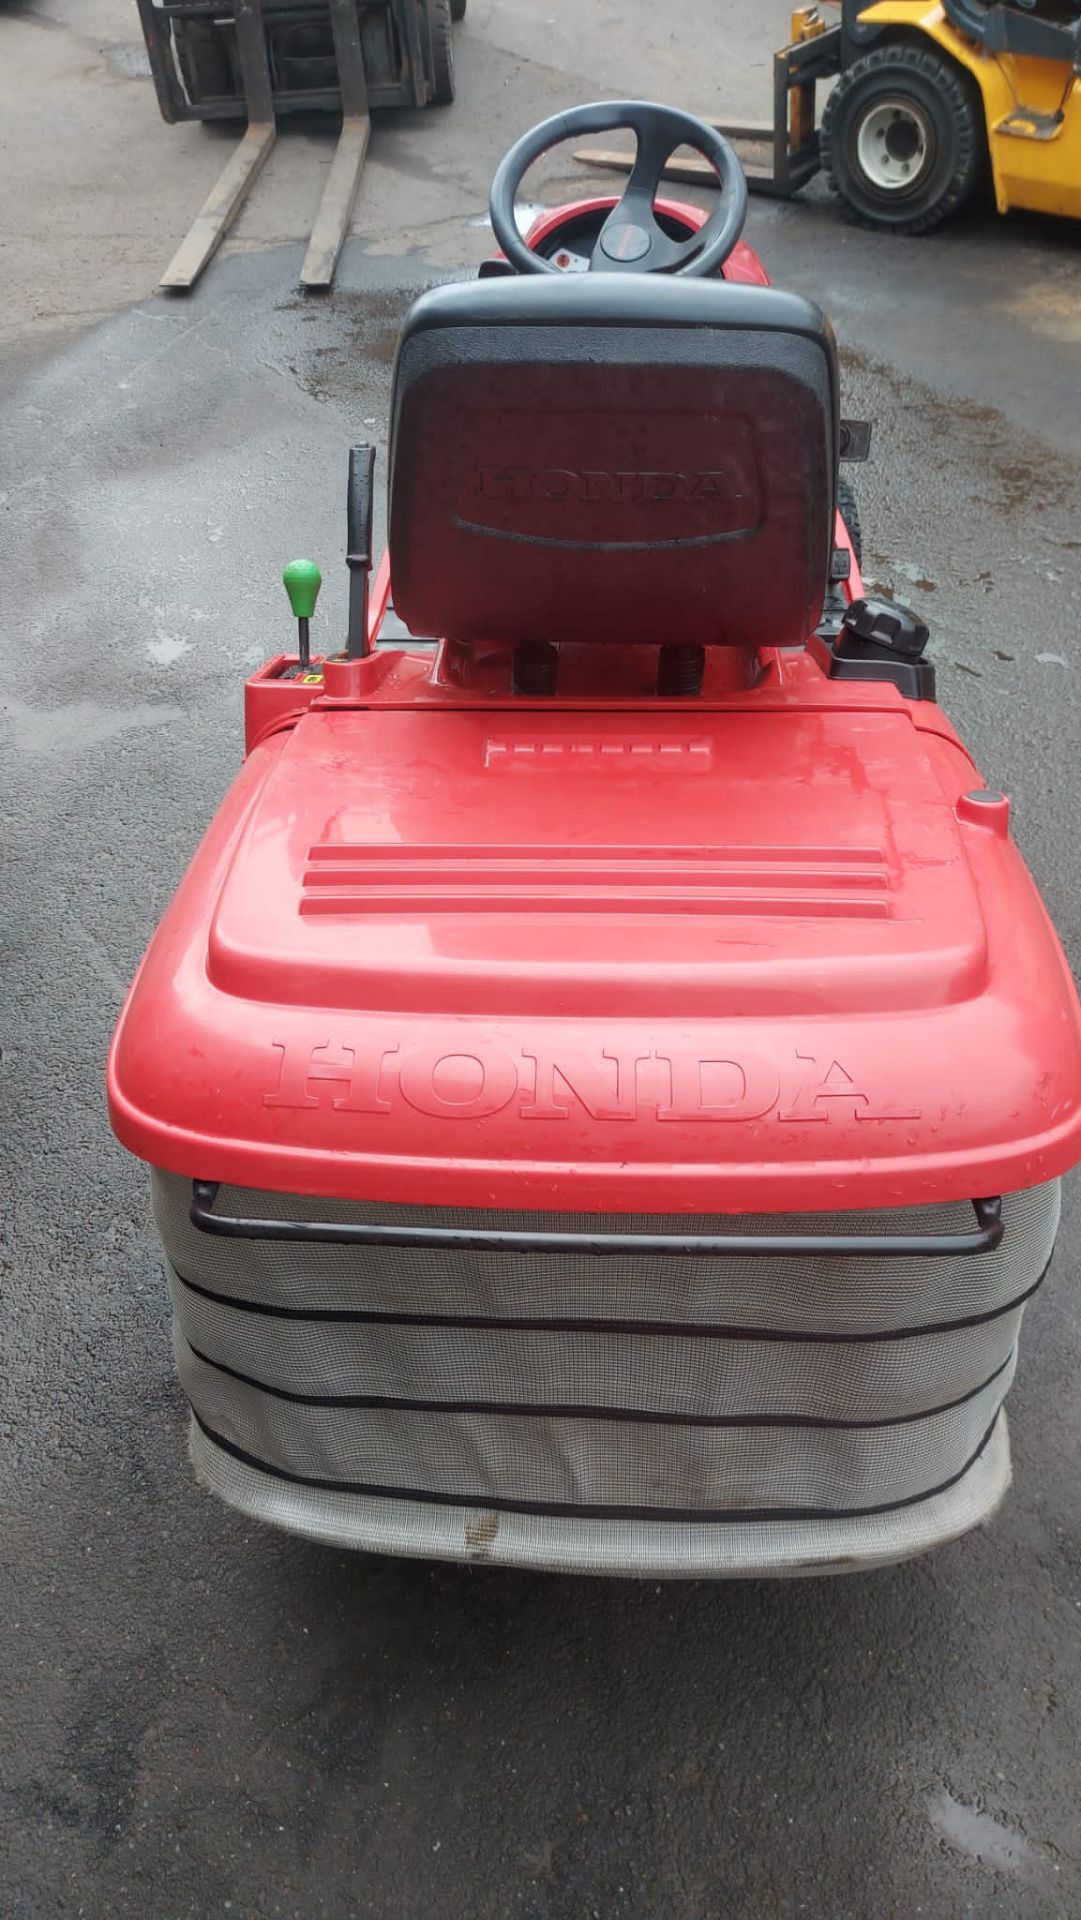 HONDA HF 2622 RIDE ON LAWN MOWER, WITH BOTH REAR DISCHARGE AND MULCHING BY MOVING LEVER *PLUS VAT* - Image 7 of 8